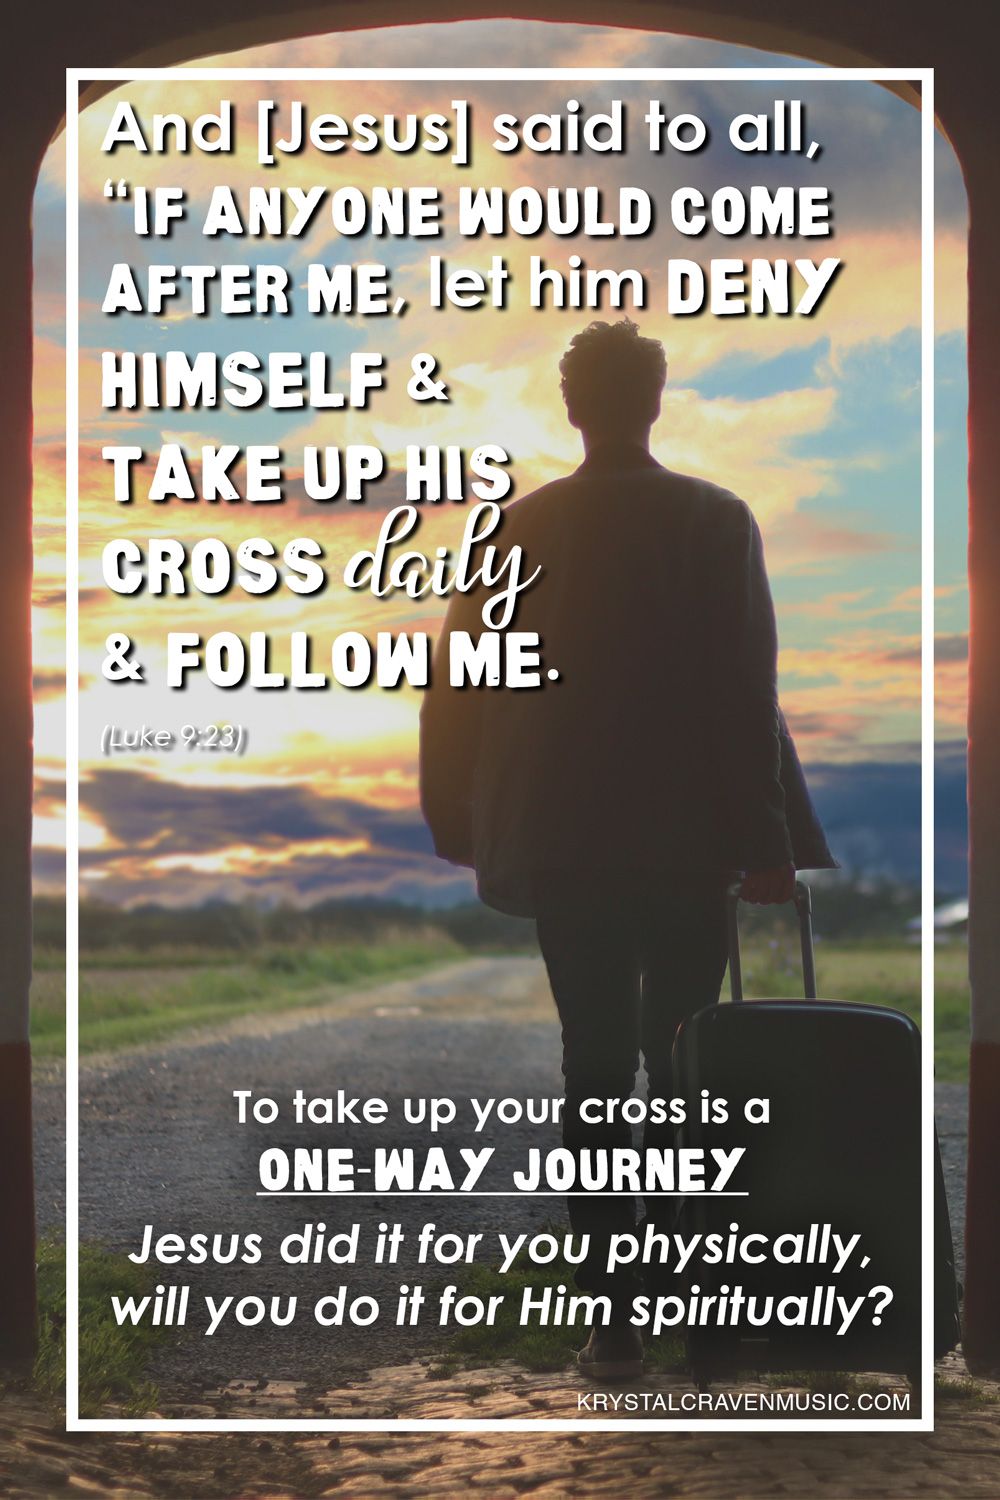 The Bible Verse text from Luke 9:23, "And Jesus said to all, if anyone would come after me, let him deny himself and take up his cross daily and follow me." Text beneath that says, "To take up your cross is a one-way journey. Jesus did it for you physically, will you do it for Him spiritually?" All text is overlaying the silhouette of a person with a suitcase walking through an open archway. There is a beautiful sky view of the sun setting in the distance.